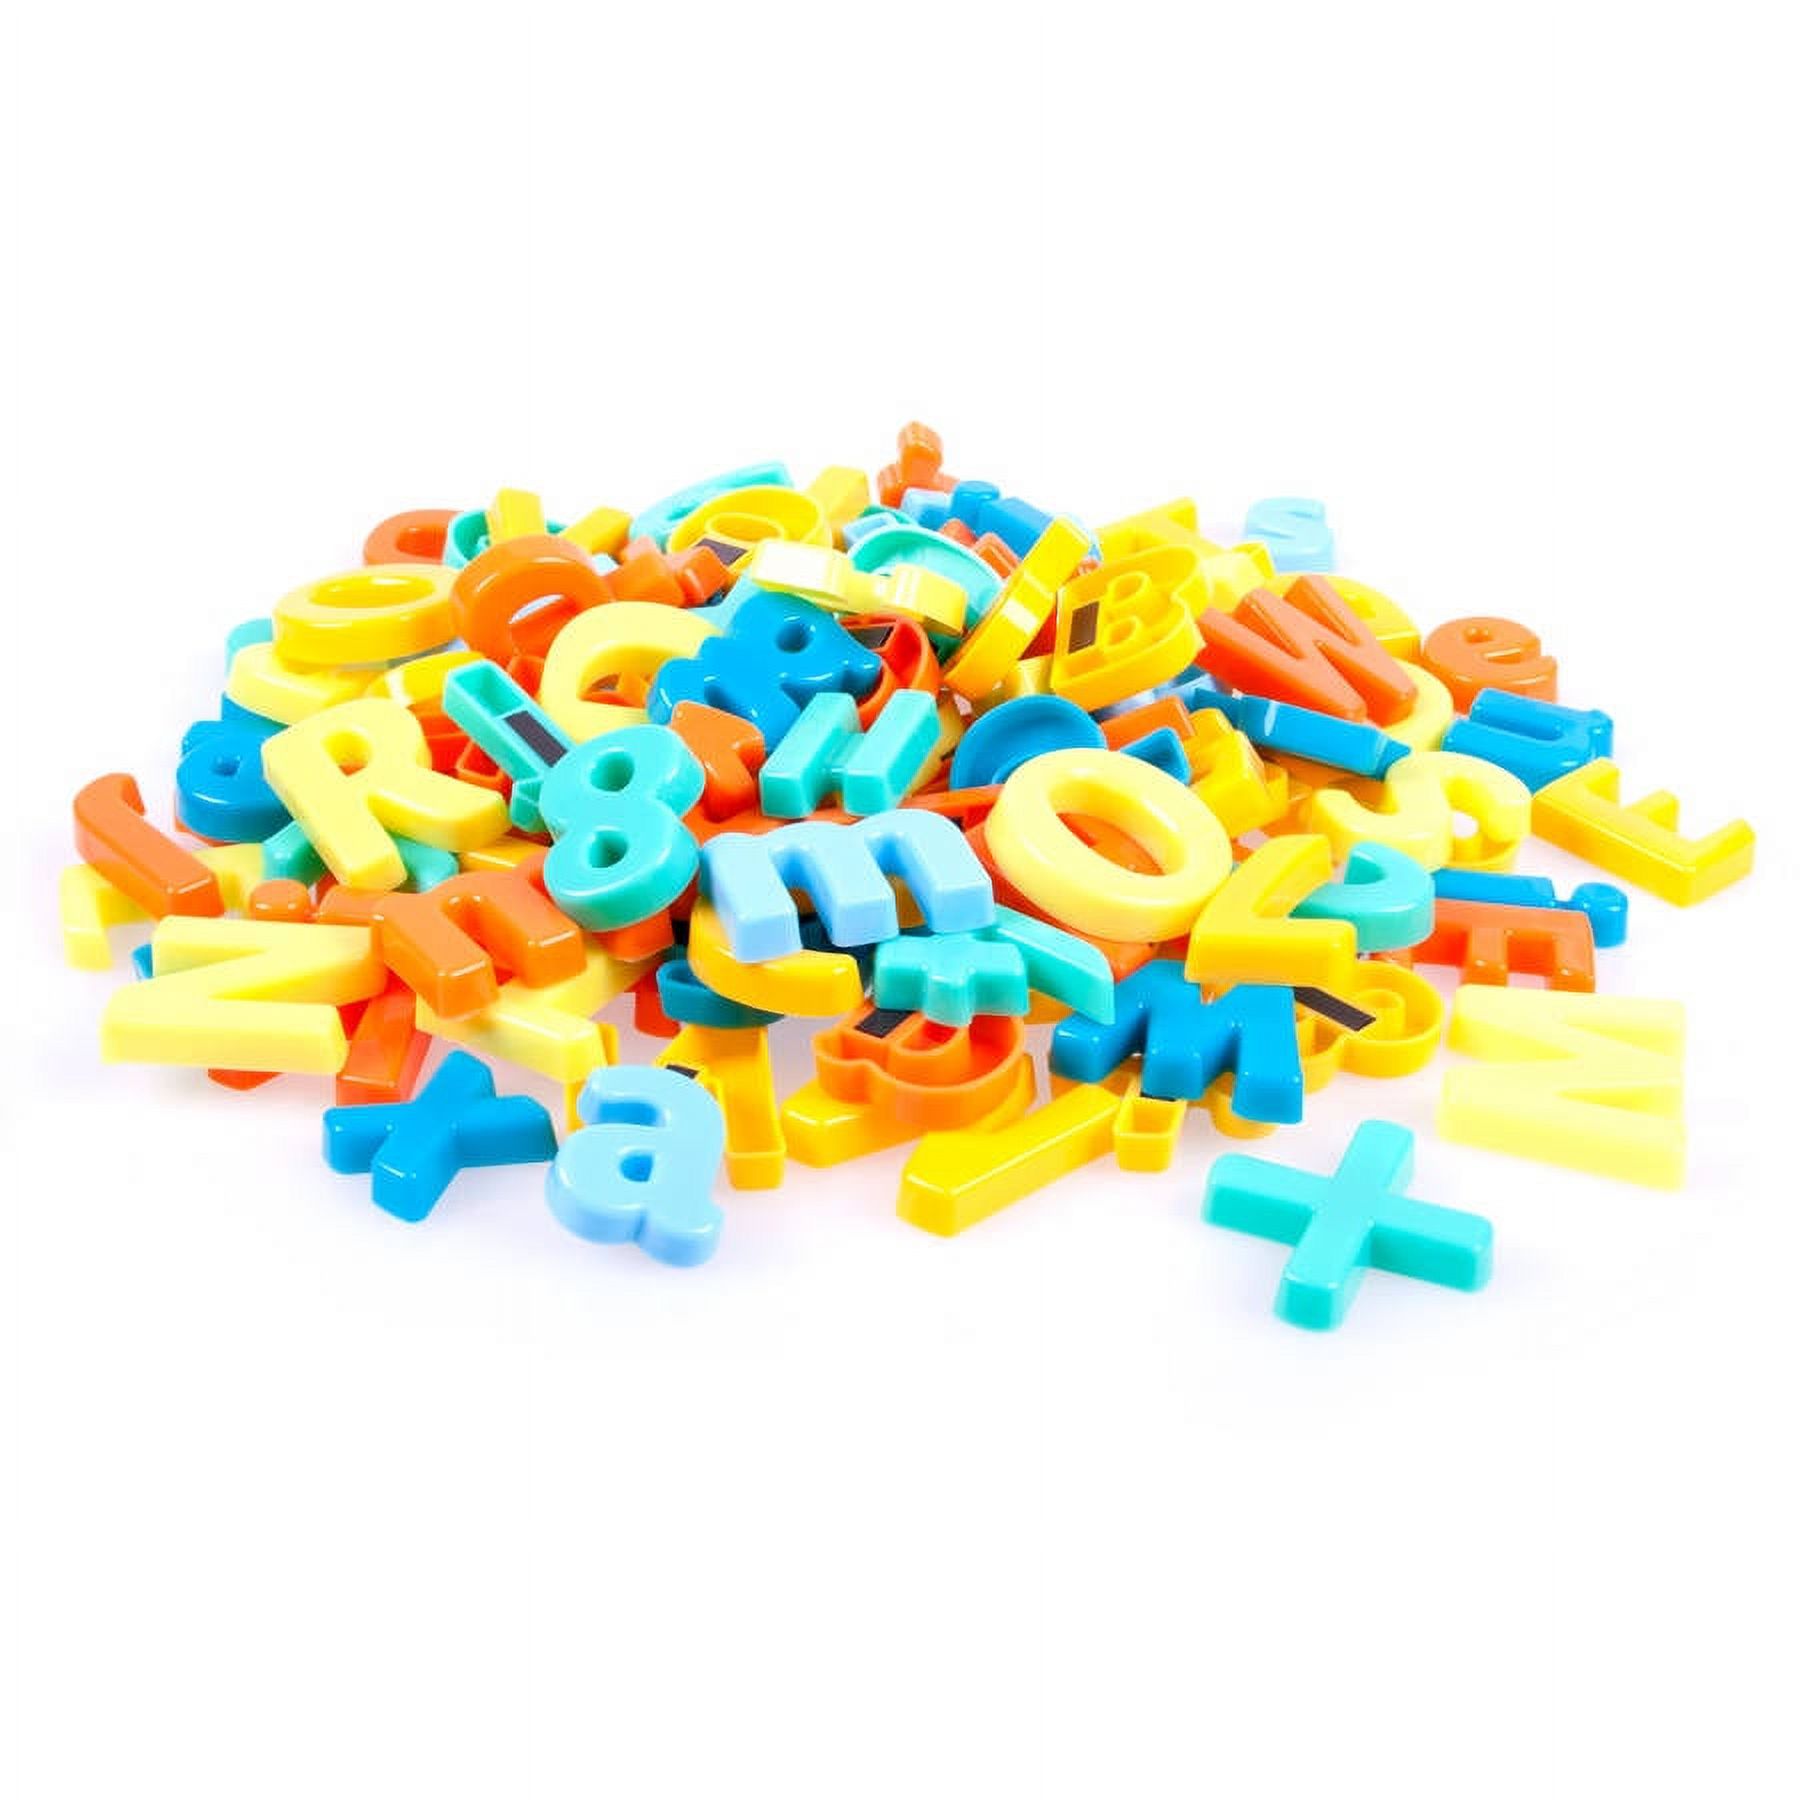 Crayola 128-Piece Letter Magnet Set: Great for Easels - image 3 of 5